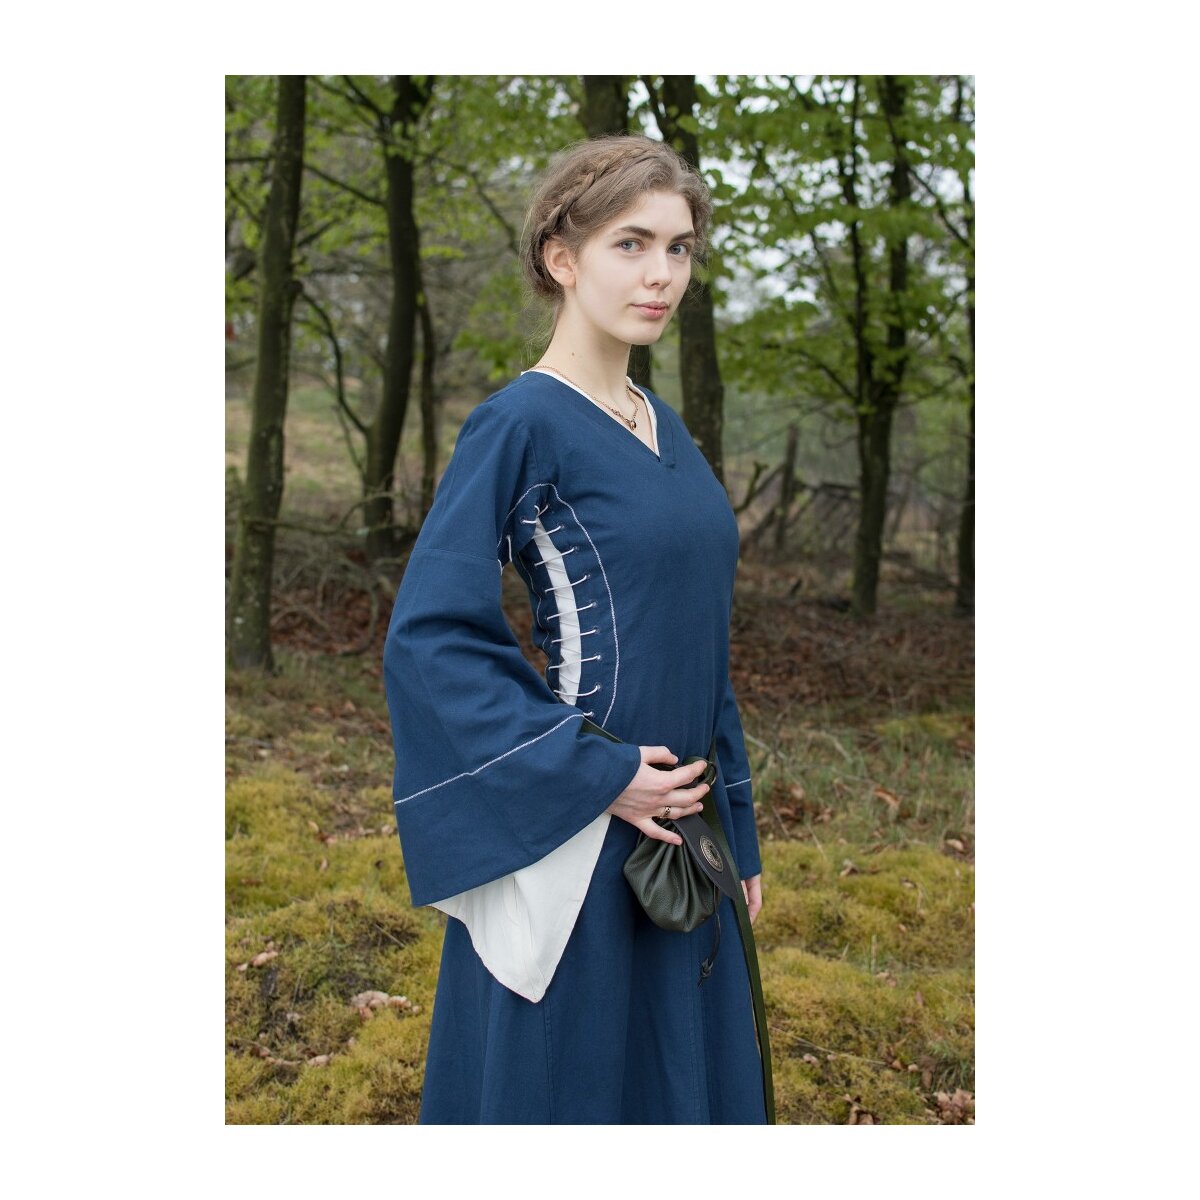 Late medieval dress or Bliaut Amal blue/natural white